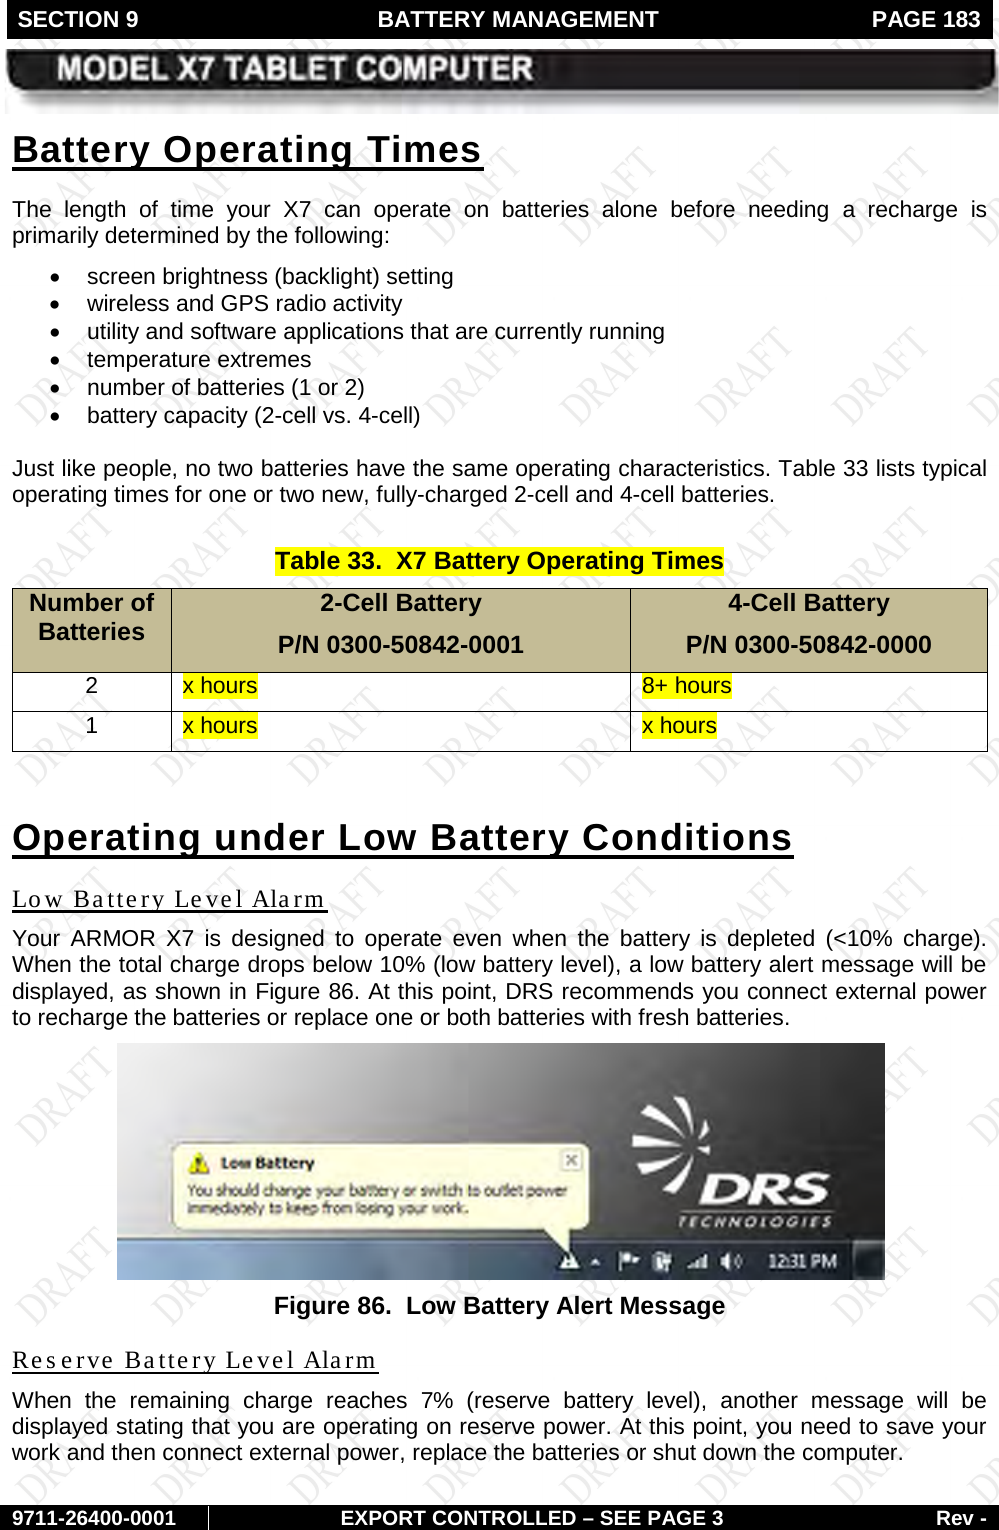 SECTION 9  BATTERY MANAGEMENT  PAGE 183        9711-26400-0001 EXPORT CONTROLLED – SEE PAGE 3 Rev - The length of time your X7 can operate on batteries alone before needing a recharge is primarily determined by the following: Battery Operating Times • screen brightness (backlight) setting  • wireless and GPS radio activity  • utility and software applications that are currently running • temperature extremes • number of batteries (1 or 2) • battery capacity (2-cell vs. 4-cell)  Just like people, no two batteries have the same operating characteristics. Table 33 lists typical operating times for one or two new, fully-charged 2-cell and 4-cell batteries.  Table 33.  X7 Battery Operating Times Number of Batteries 2-Cell Battery  P/N 0300-50842-0001 4-Cell Battery P/N 0300-50842-0000 2 x hours 8+ hours 1 x hours x hours  Operating under Low Battery Conditions Your ARMOR X7 is designed to operate even when the battery is depleted (&lt;10% charge). When the total charge drops below 10% (low battery level), a low battery alert message will be displayed, as shown in Low Battery Level Alarm Figure 86. At this point, DRS recommends you connect external power to recharge the batteries or replace one or both batteries with fresh batteries.  Figure 86.  Low Battery Alert Message When the remaining charge reaches  7%  (reserve battery level),  another message will be displayed stating that you are operating on reserve power. At this point, you need to save your work and then connect external power, replace the batteries or shut down the computer.  Reserve Battery Level Alarm 